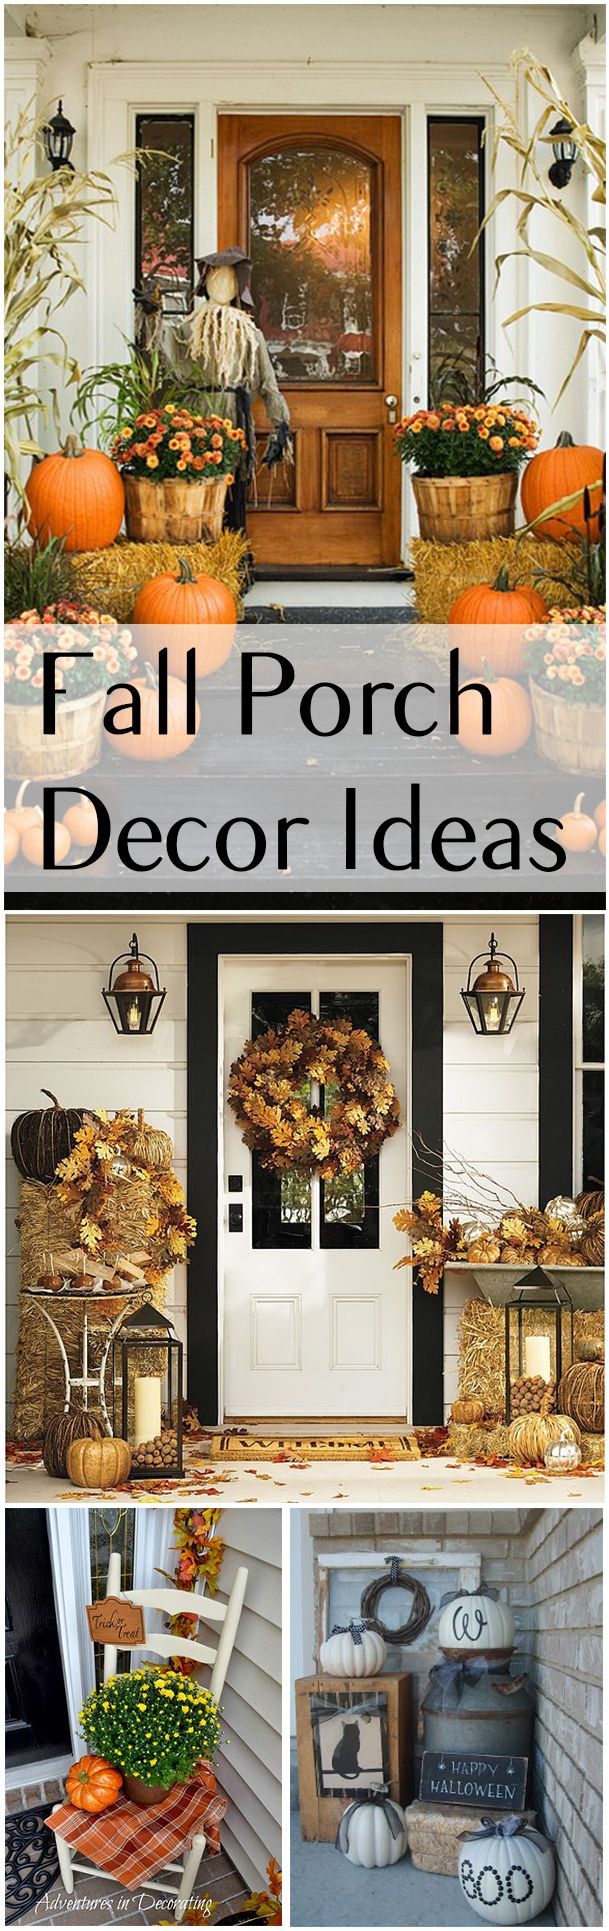 Fall Porch Decor Ideas- Amazing Fall decorations and front door and porch decora...